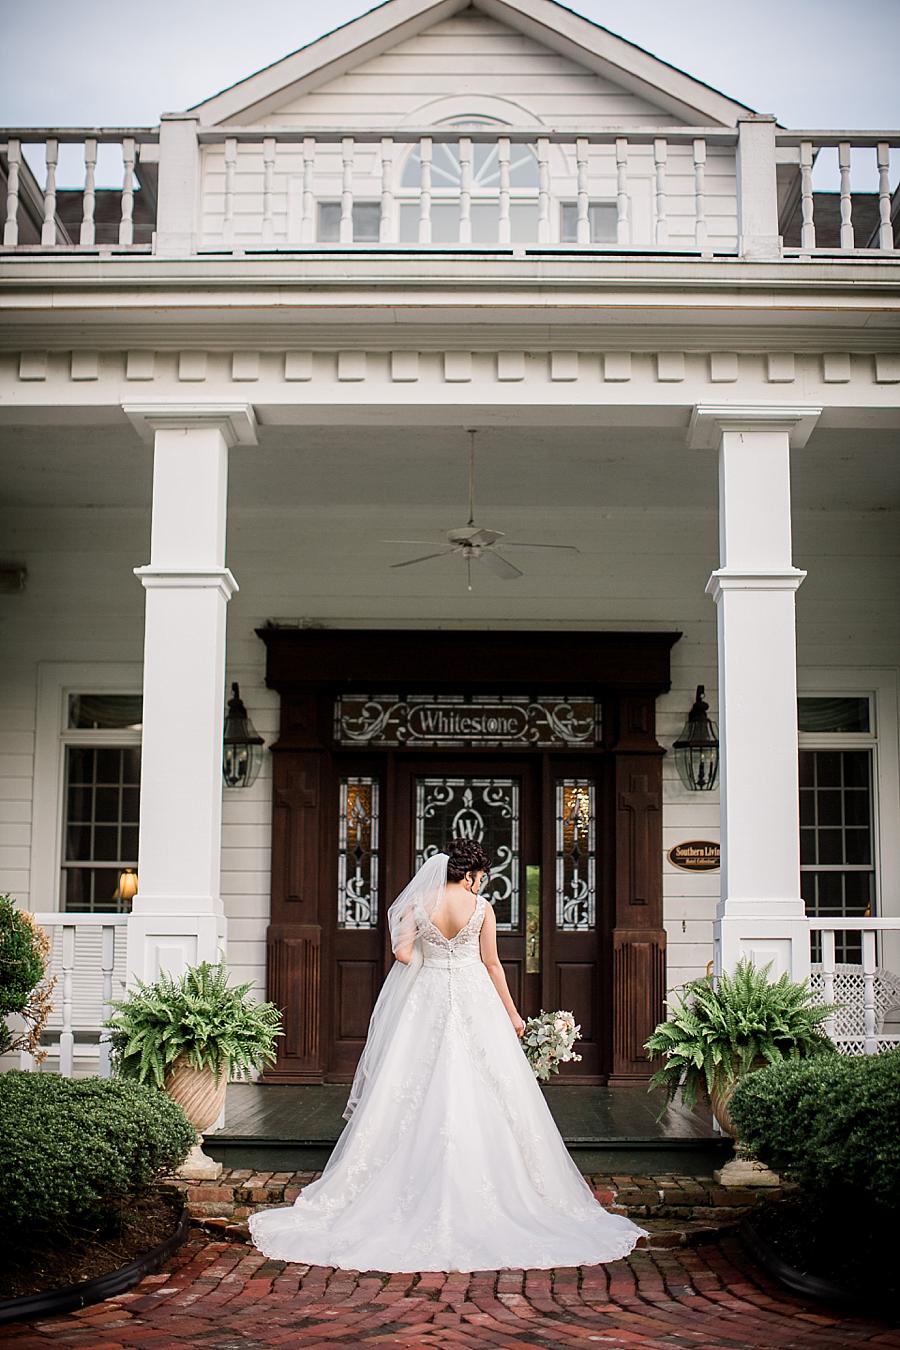 The back of the dress at this Whitestone Country Inn bridal session by Knoxville Wedding Photographer, Amanda May Photos.